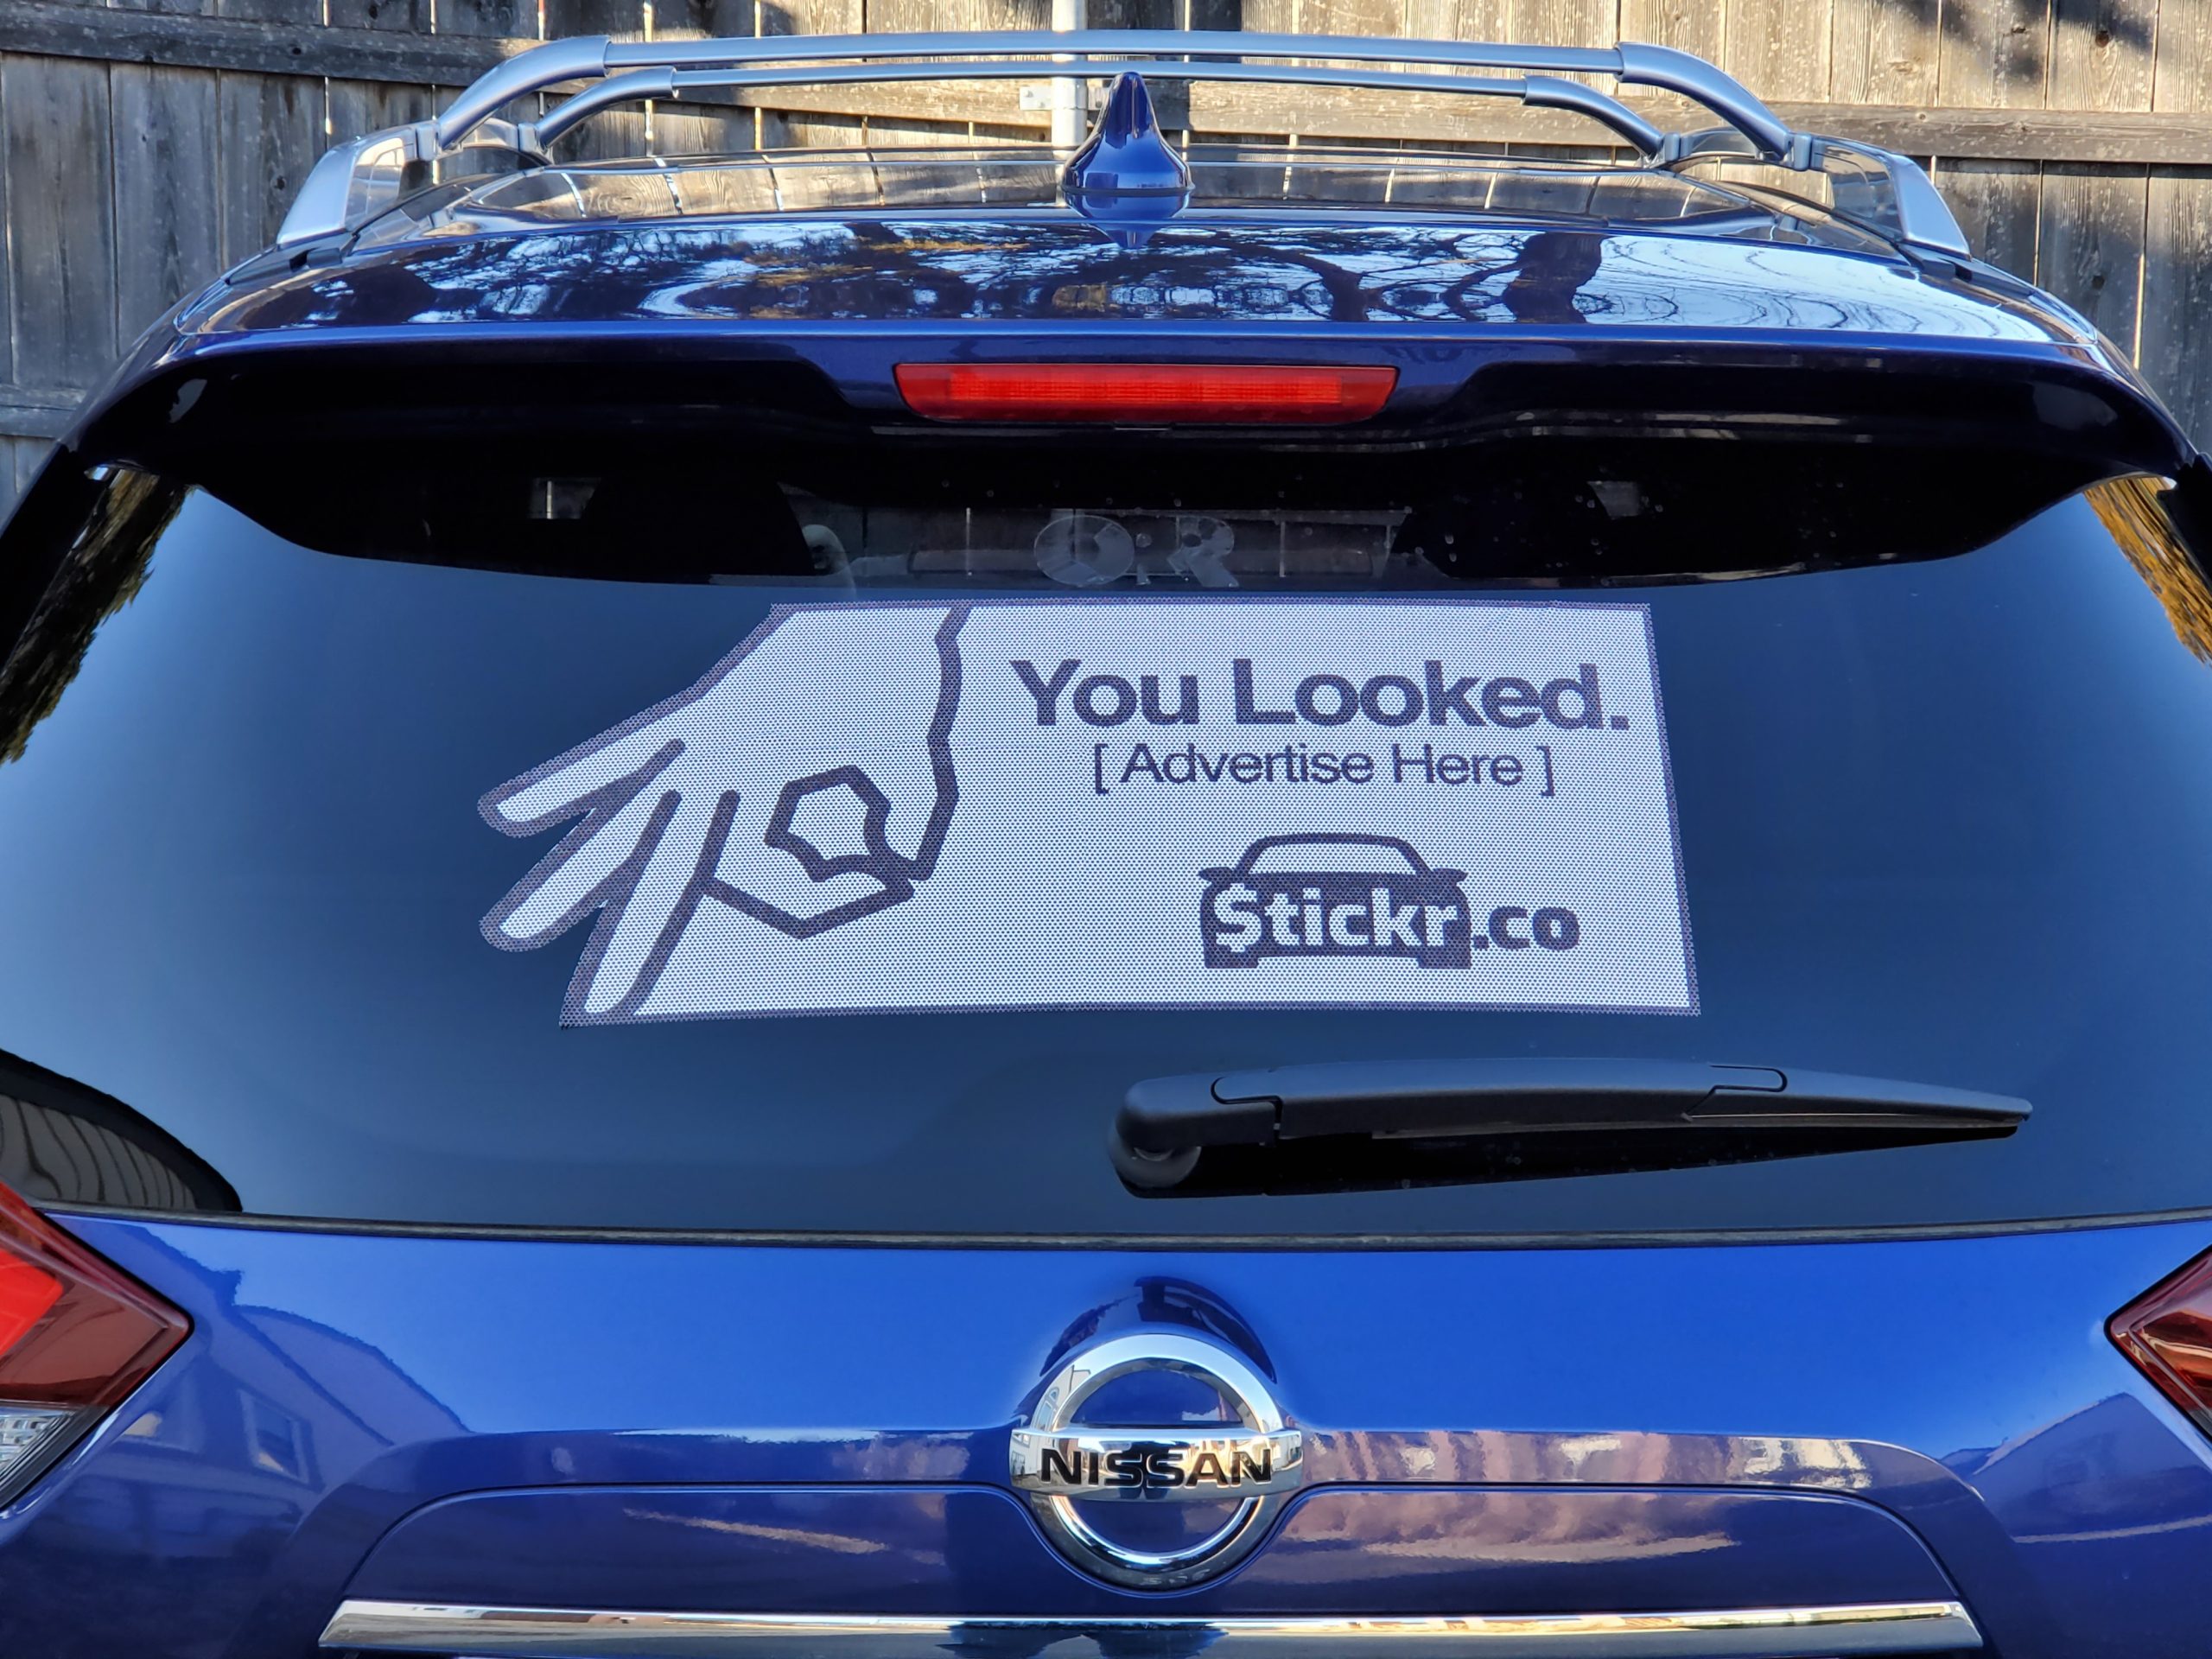 advertising on cars